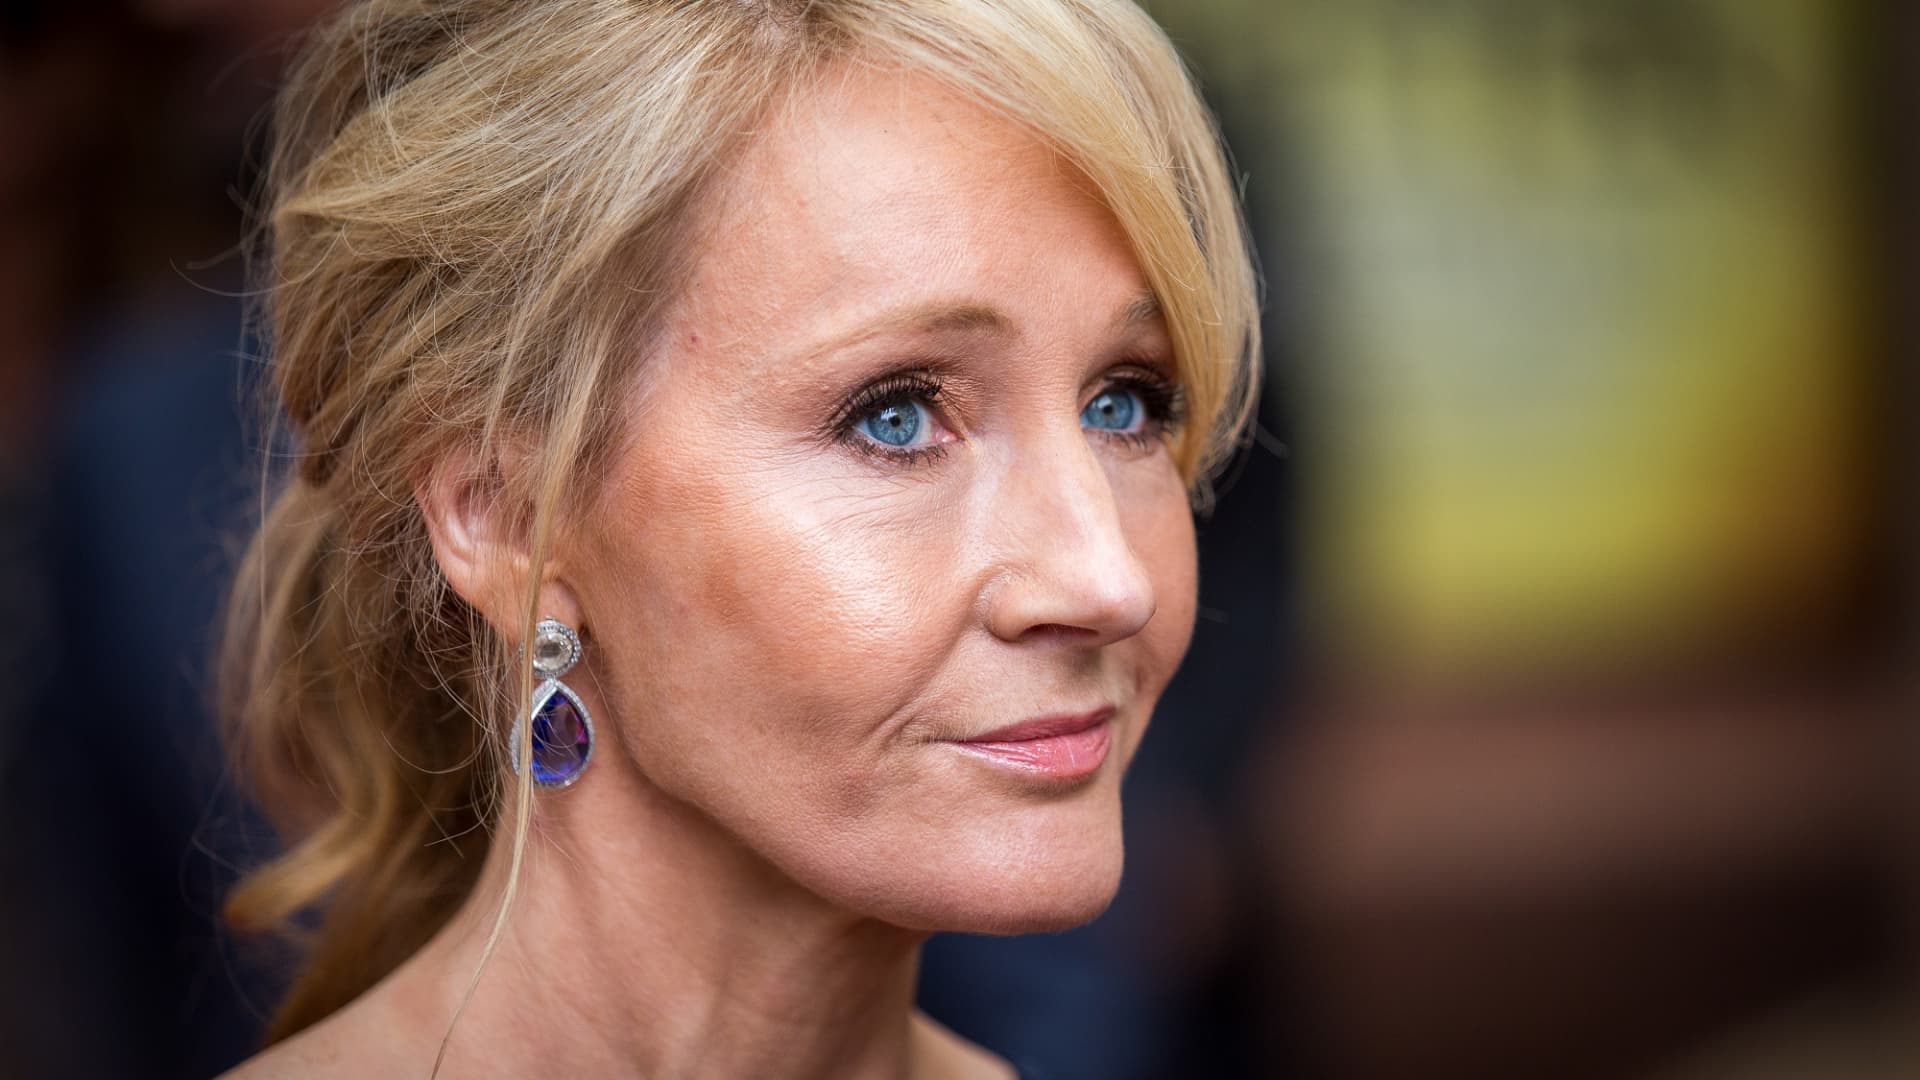 JK Rowling criticizes 'cancel culture' in open letter signed by 150 public figures